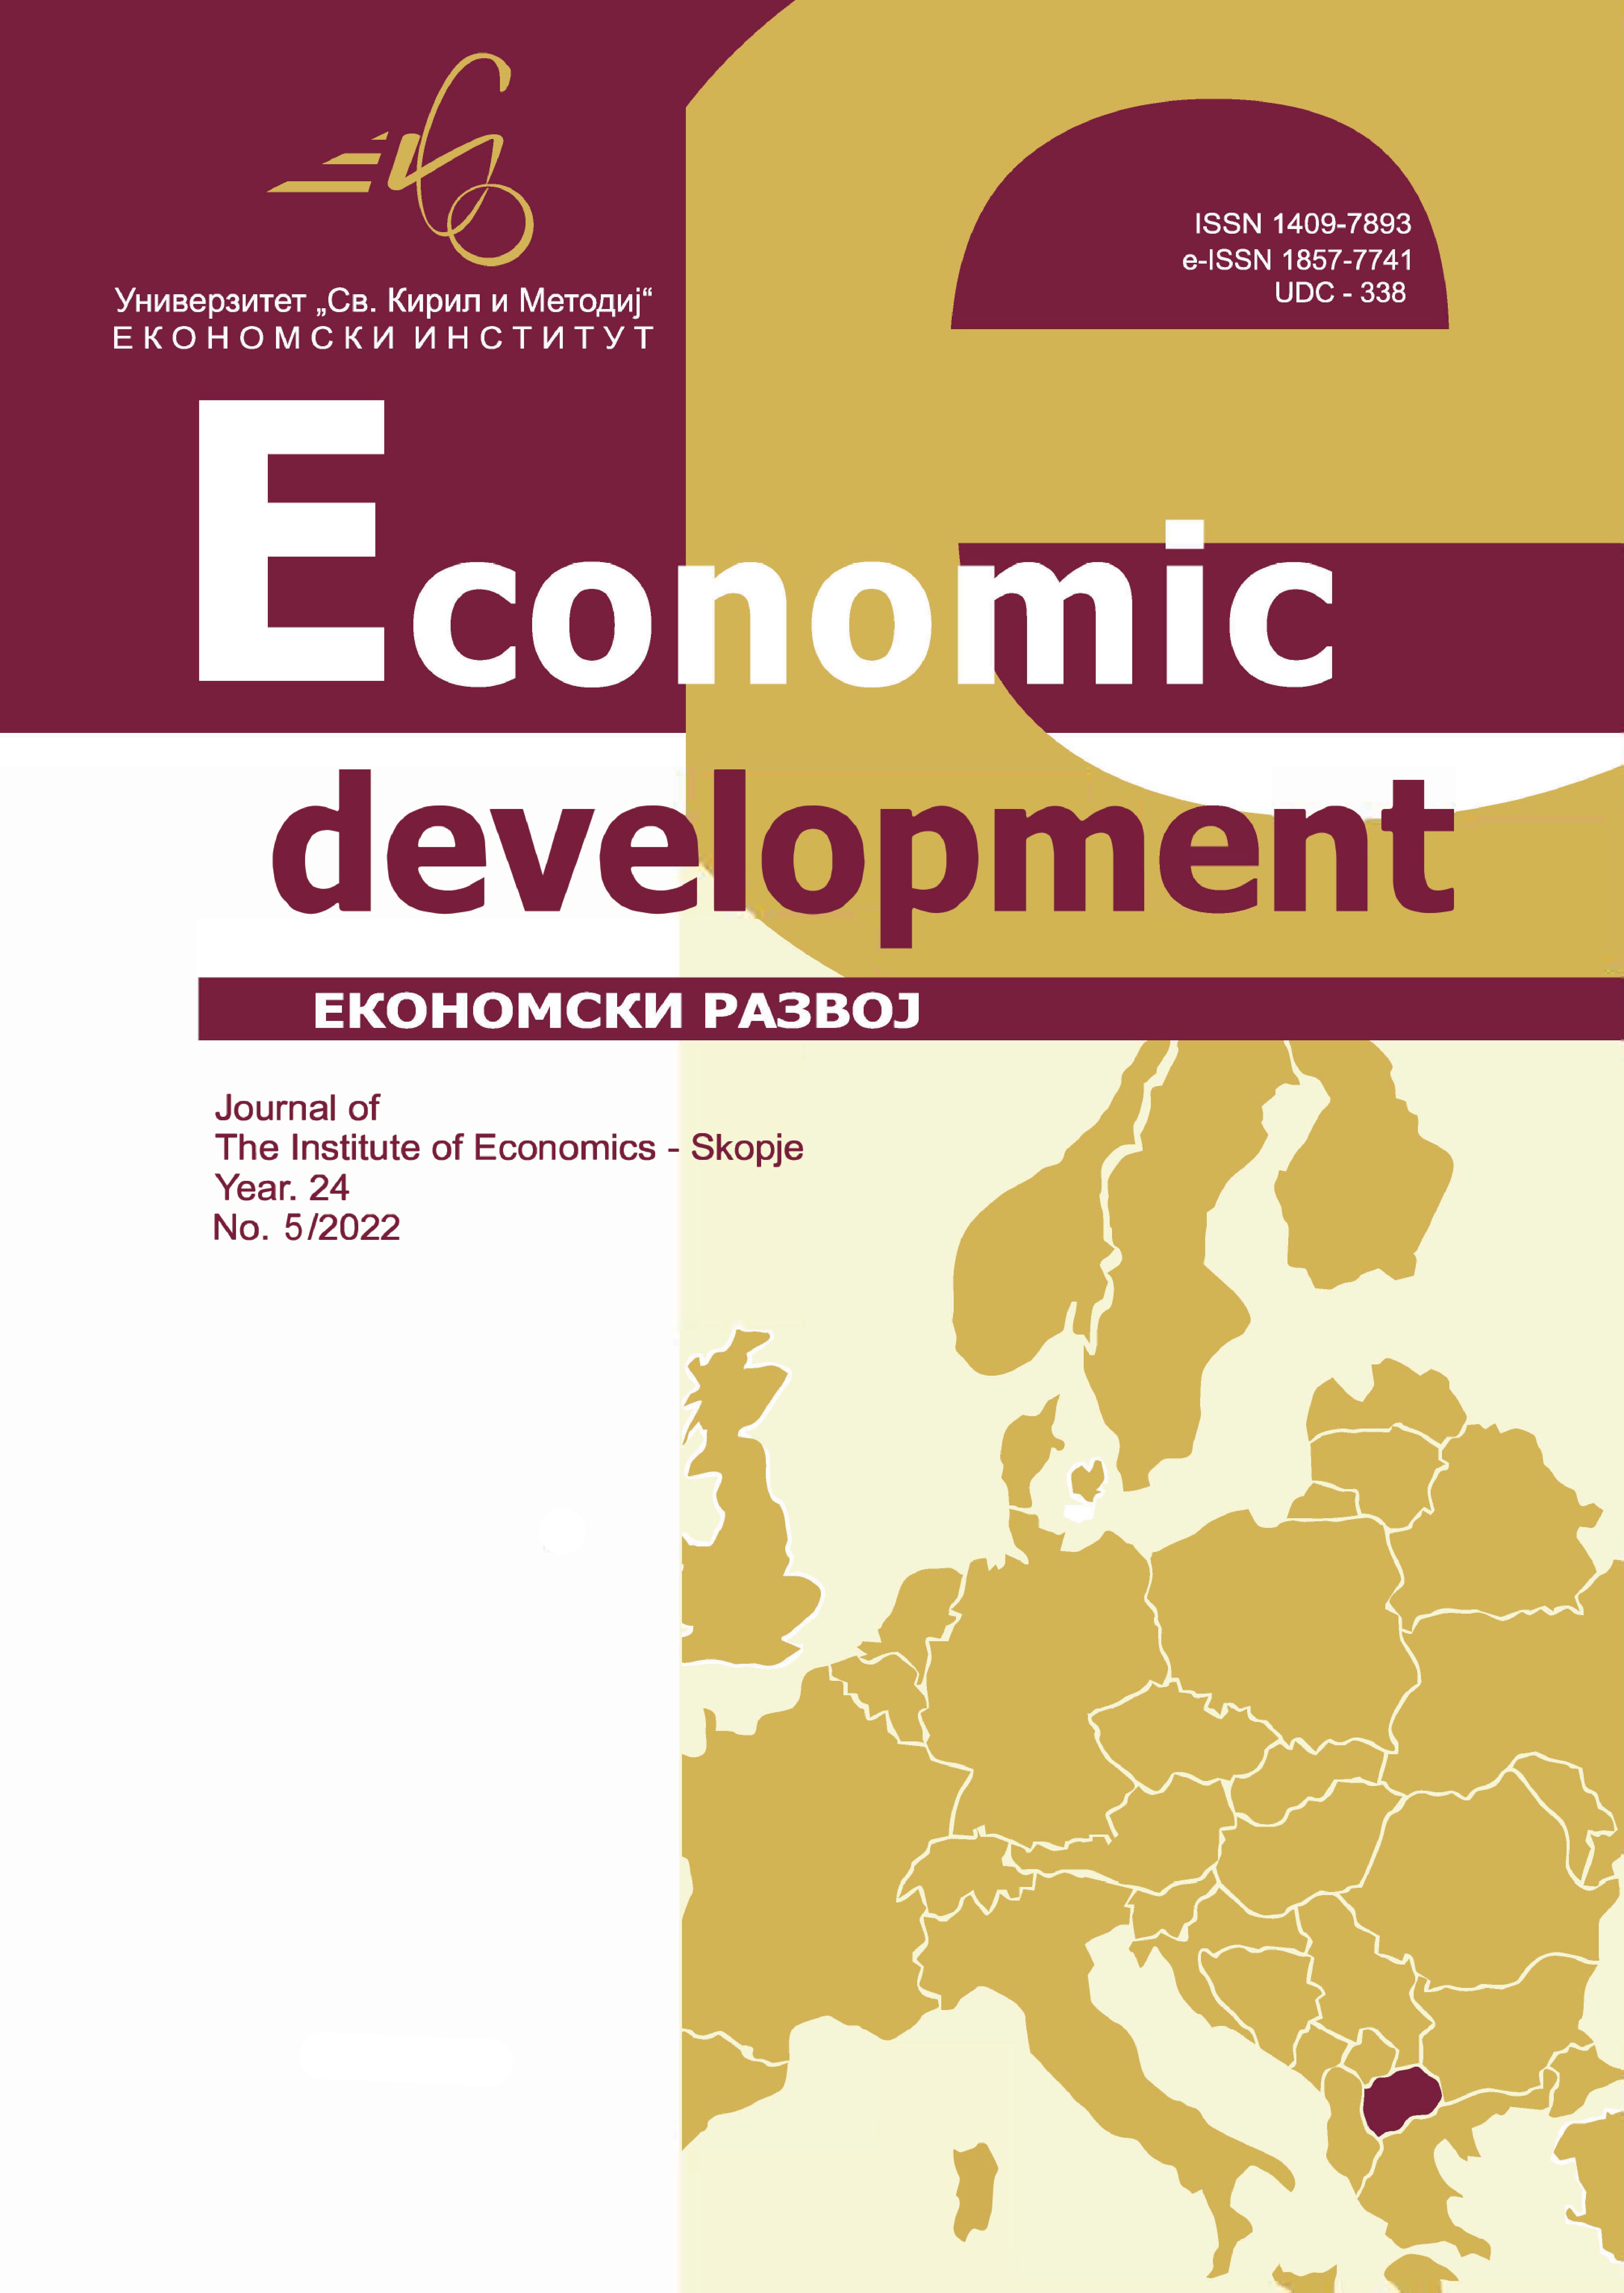 EMIGRATION AND REMITTANCES DURING COVID-19: EVIDENCE FROM NORTH MACEDONIA AND SERBIA